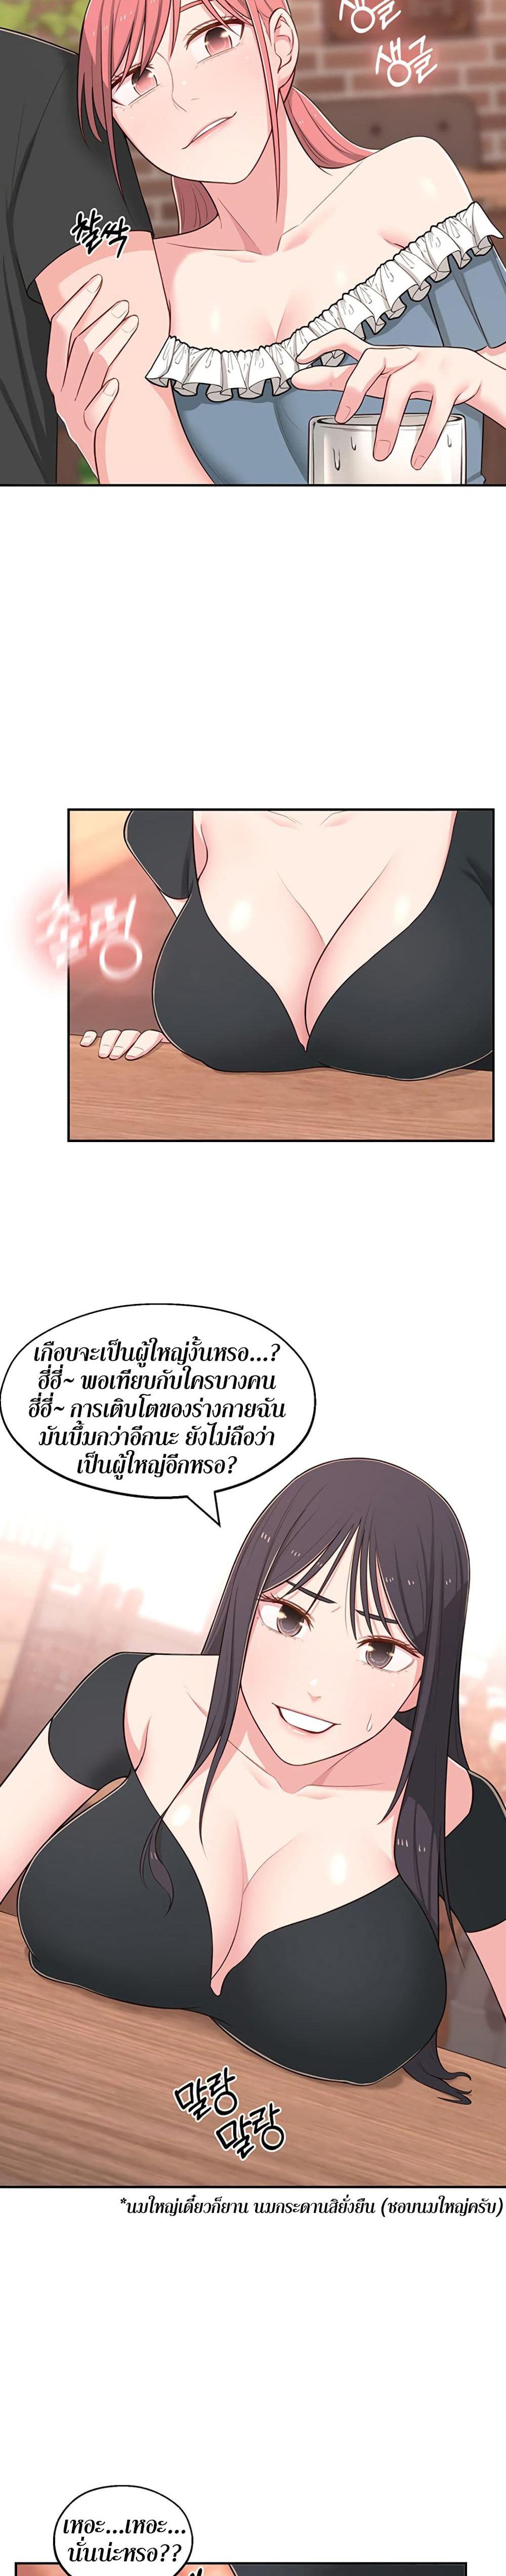 A Knowing Sister 13 ภาพ 11